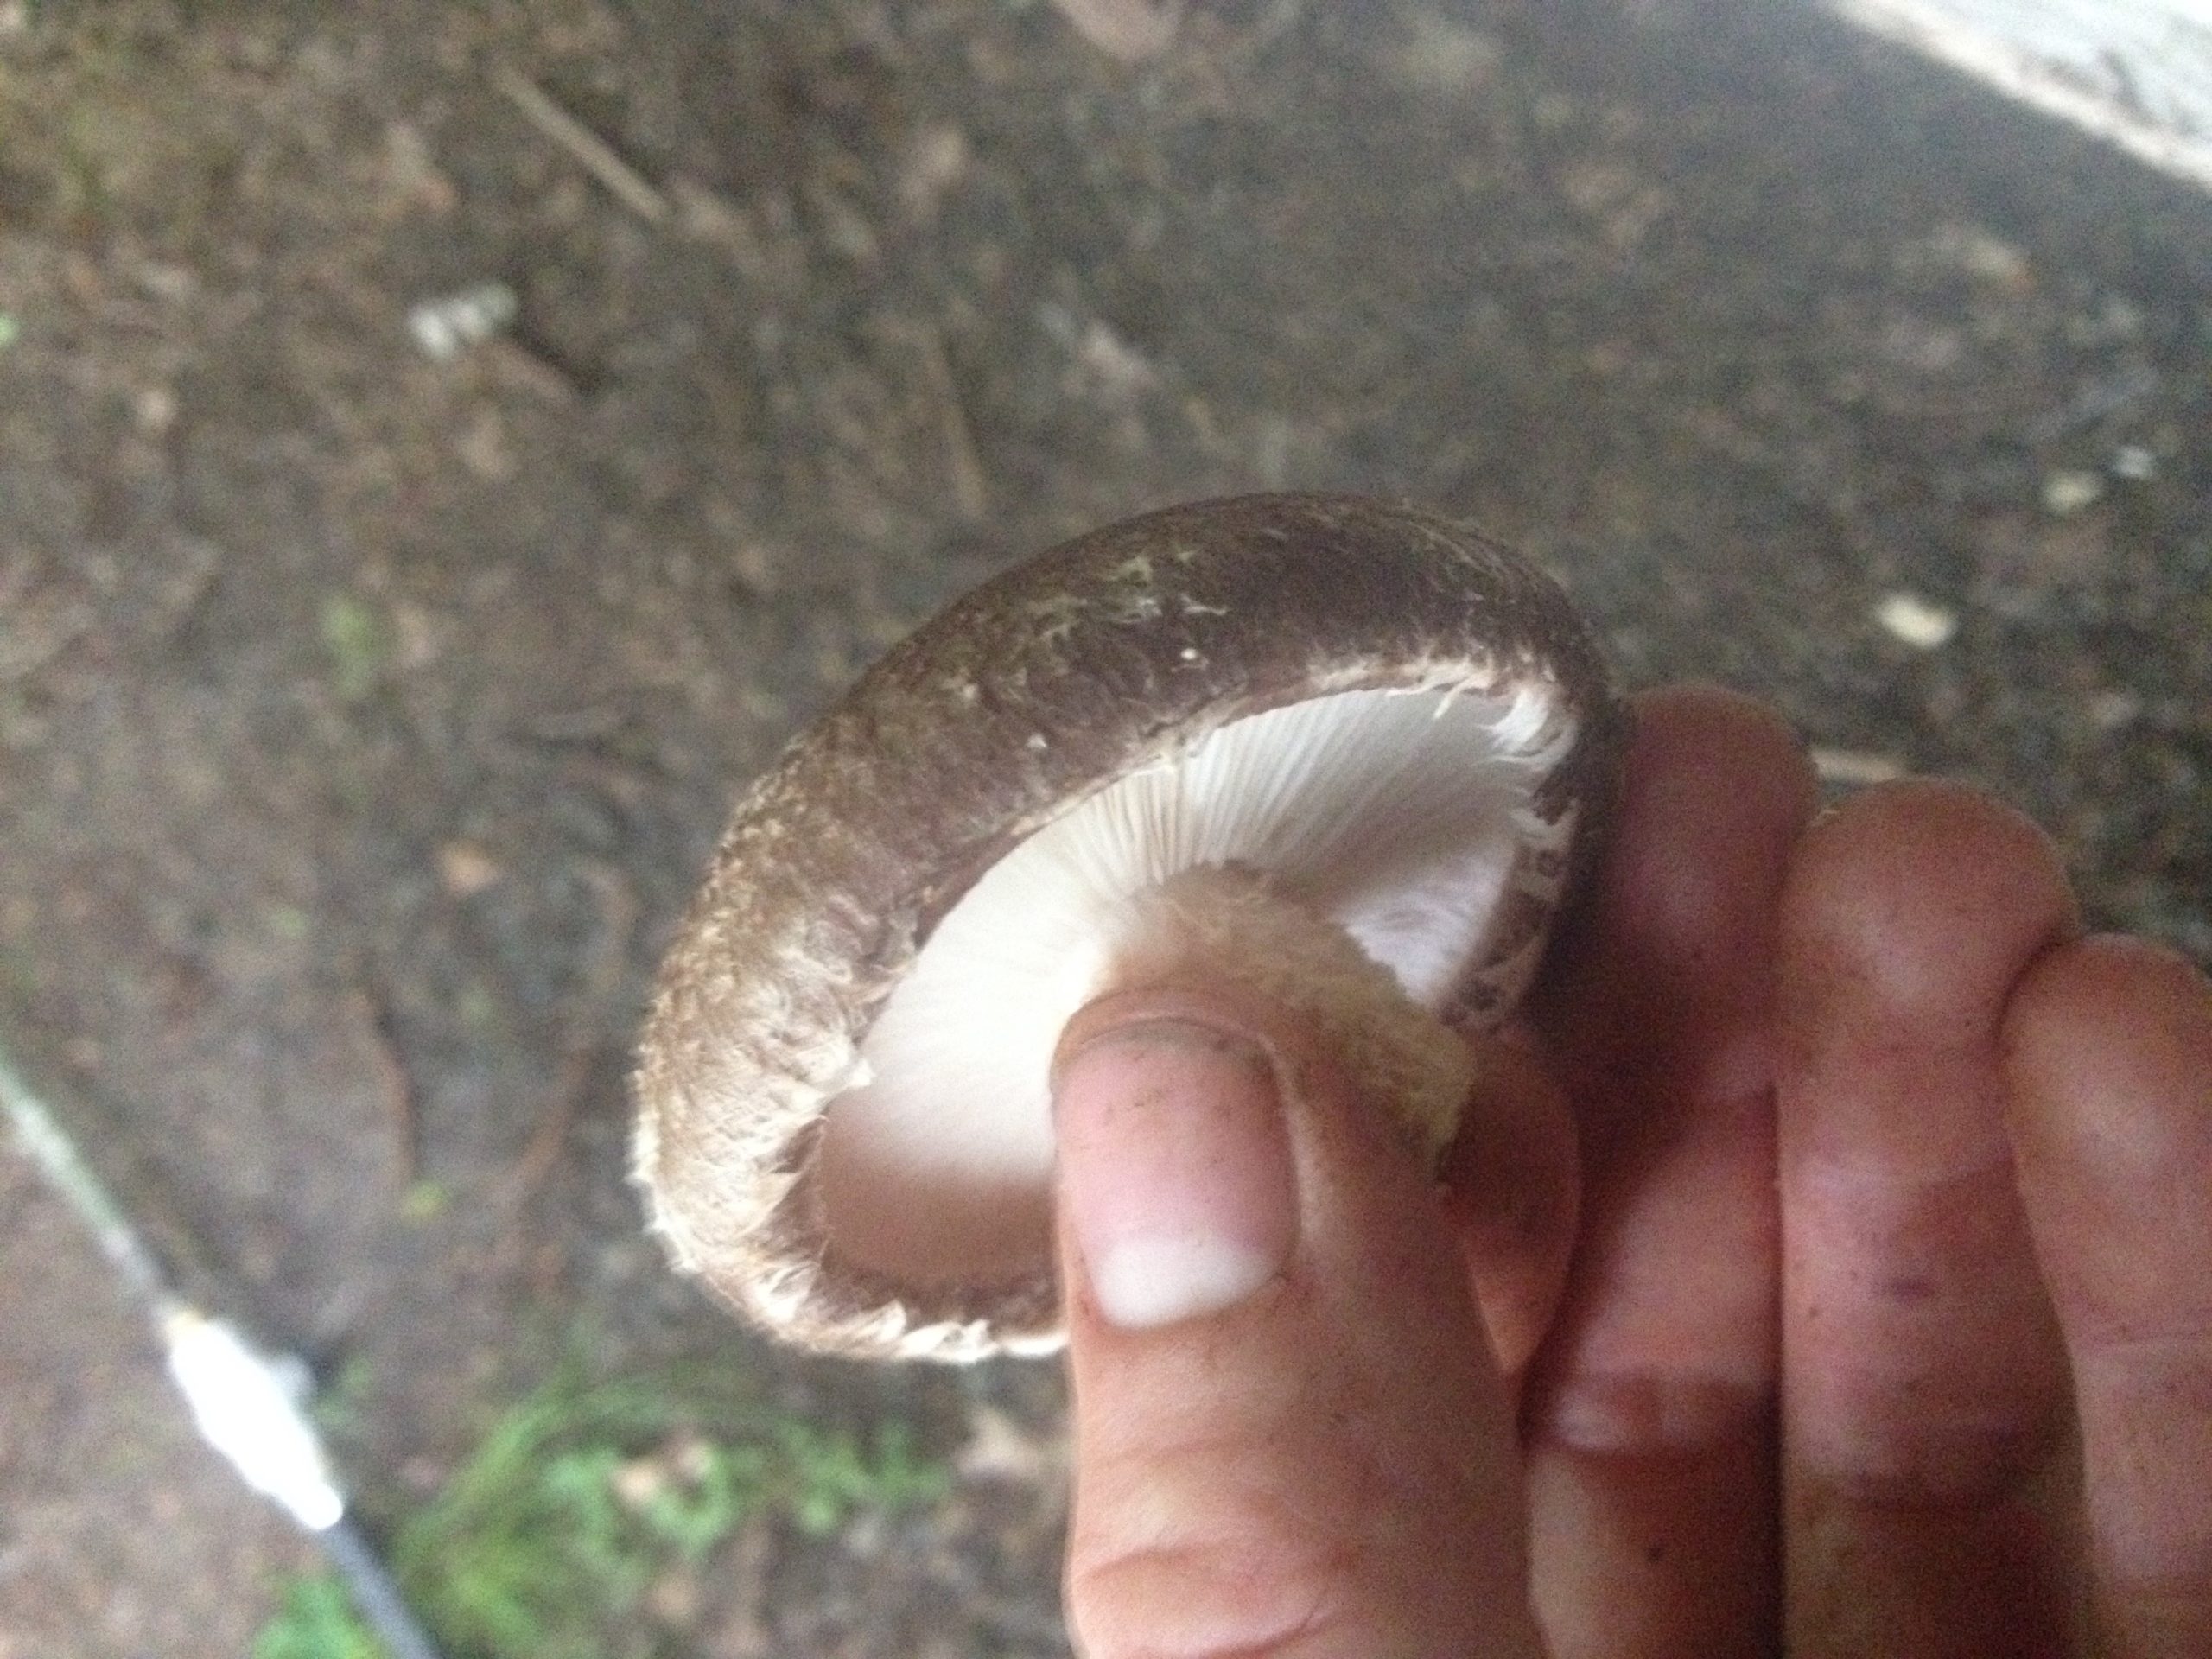 A perfectly ripe shiitake will have exposed gills and lightly rounded edges.